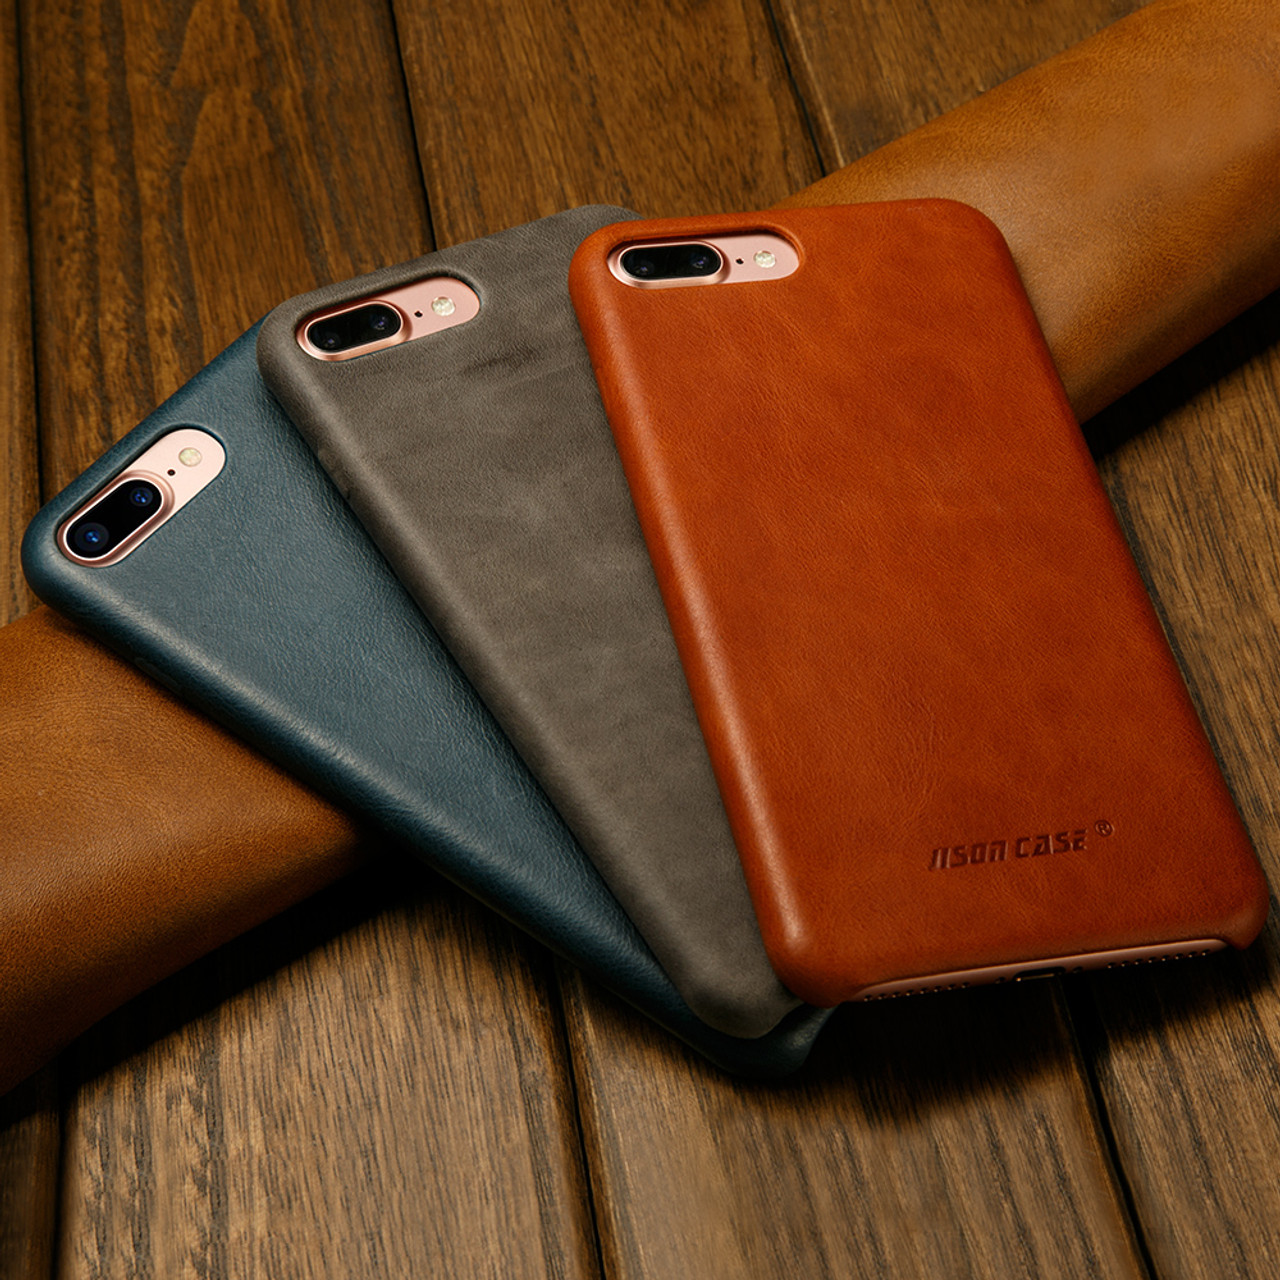 Jisoncase Original Leather Case for iPhone 8 8 Plus Case Cover Genuine  Leather Luxury Slim Back Cover for iPhone 7 7 Plus Capas - OnshopDeals.Com